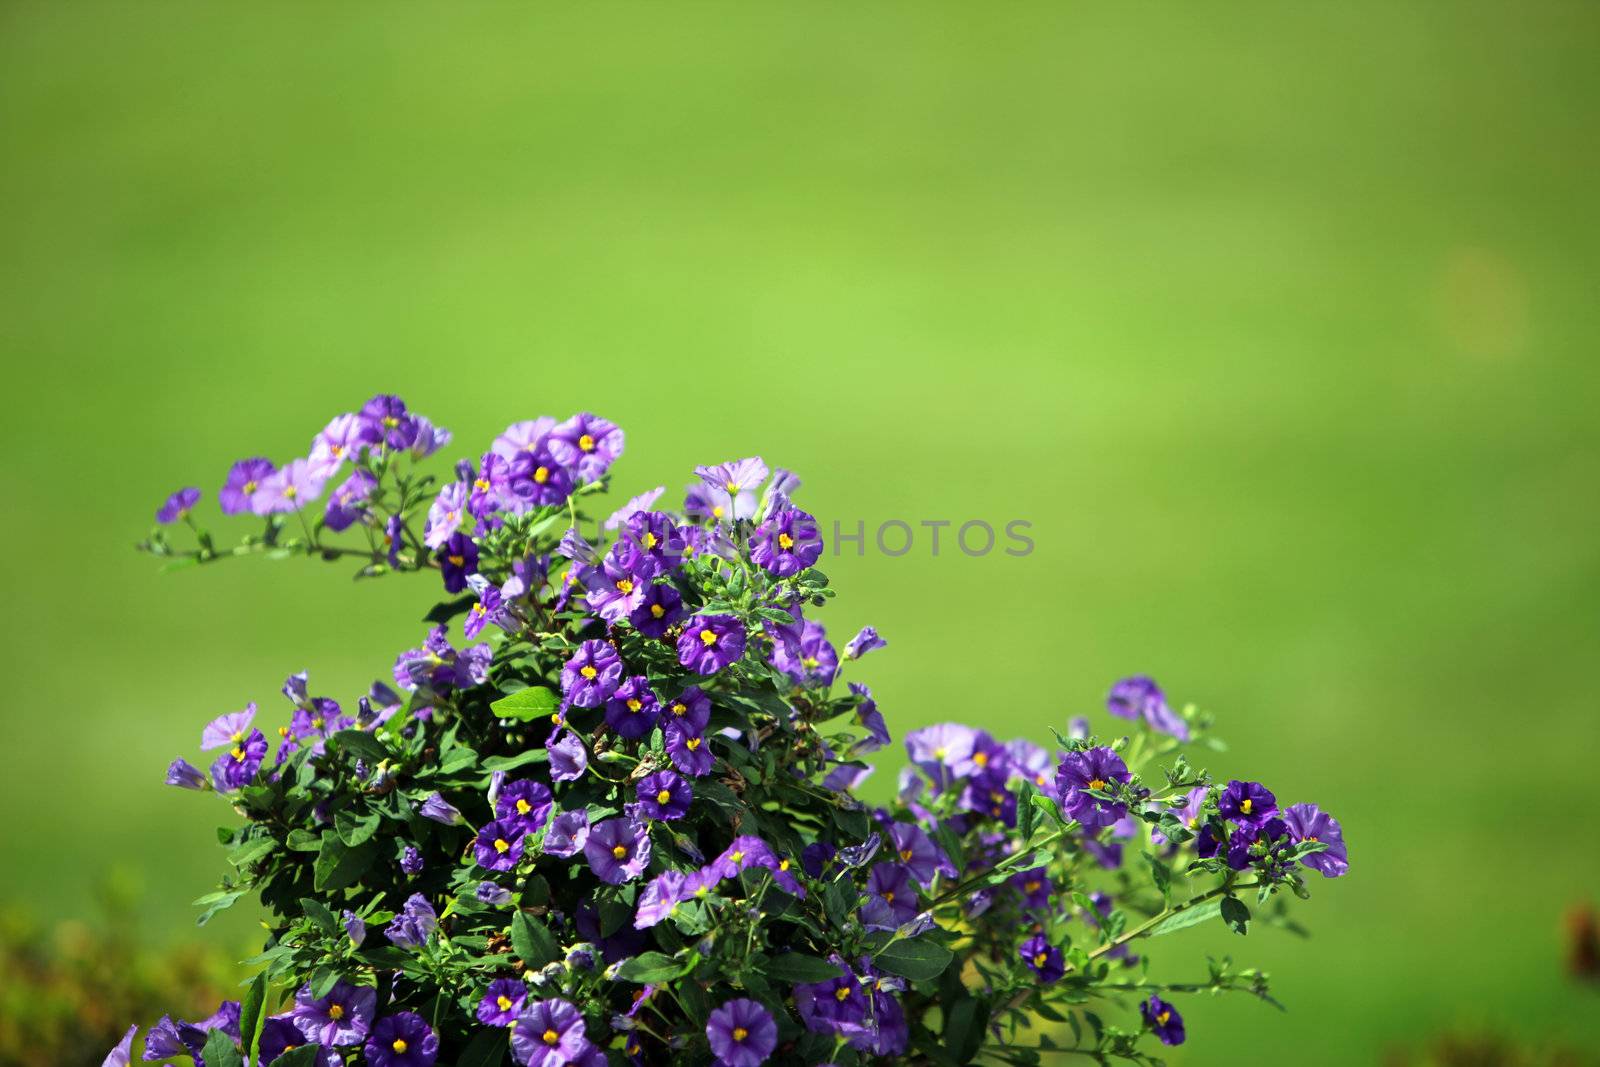 green in the background with lilac flower foreground